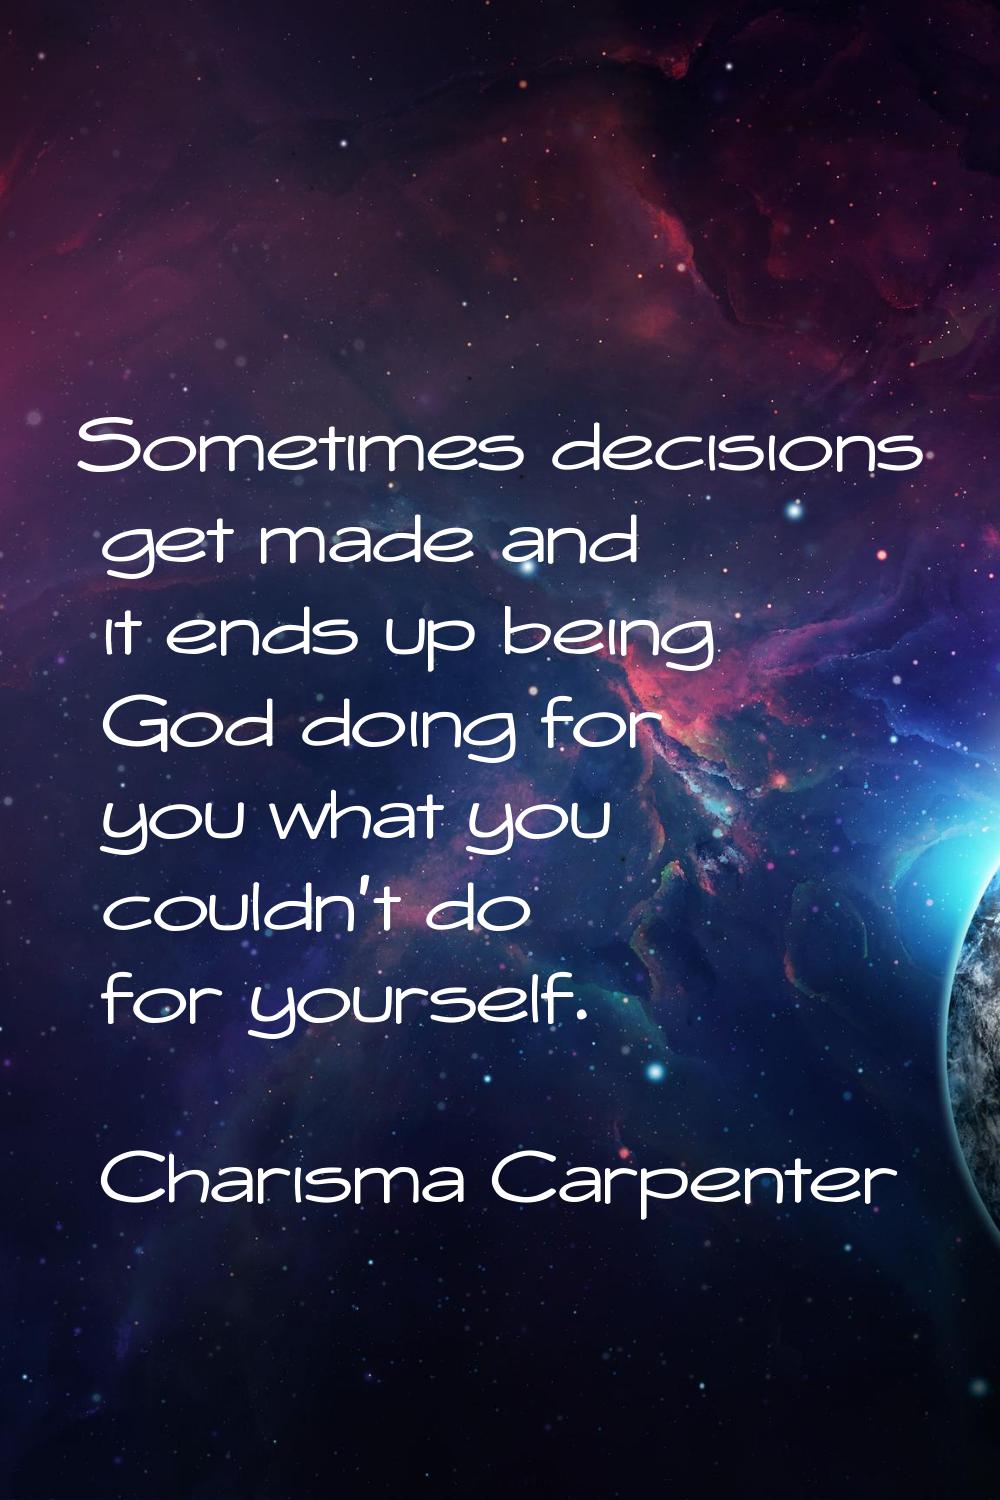 Sometimes decisions get made and it ends up being God doing for you what you couldn't do for yourse